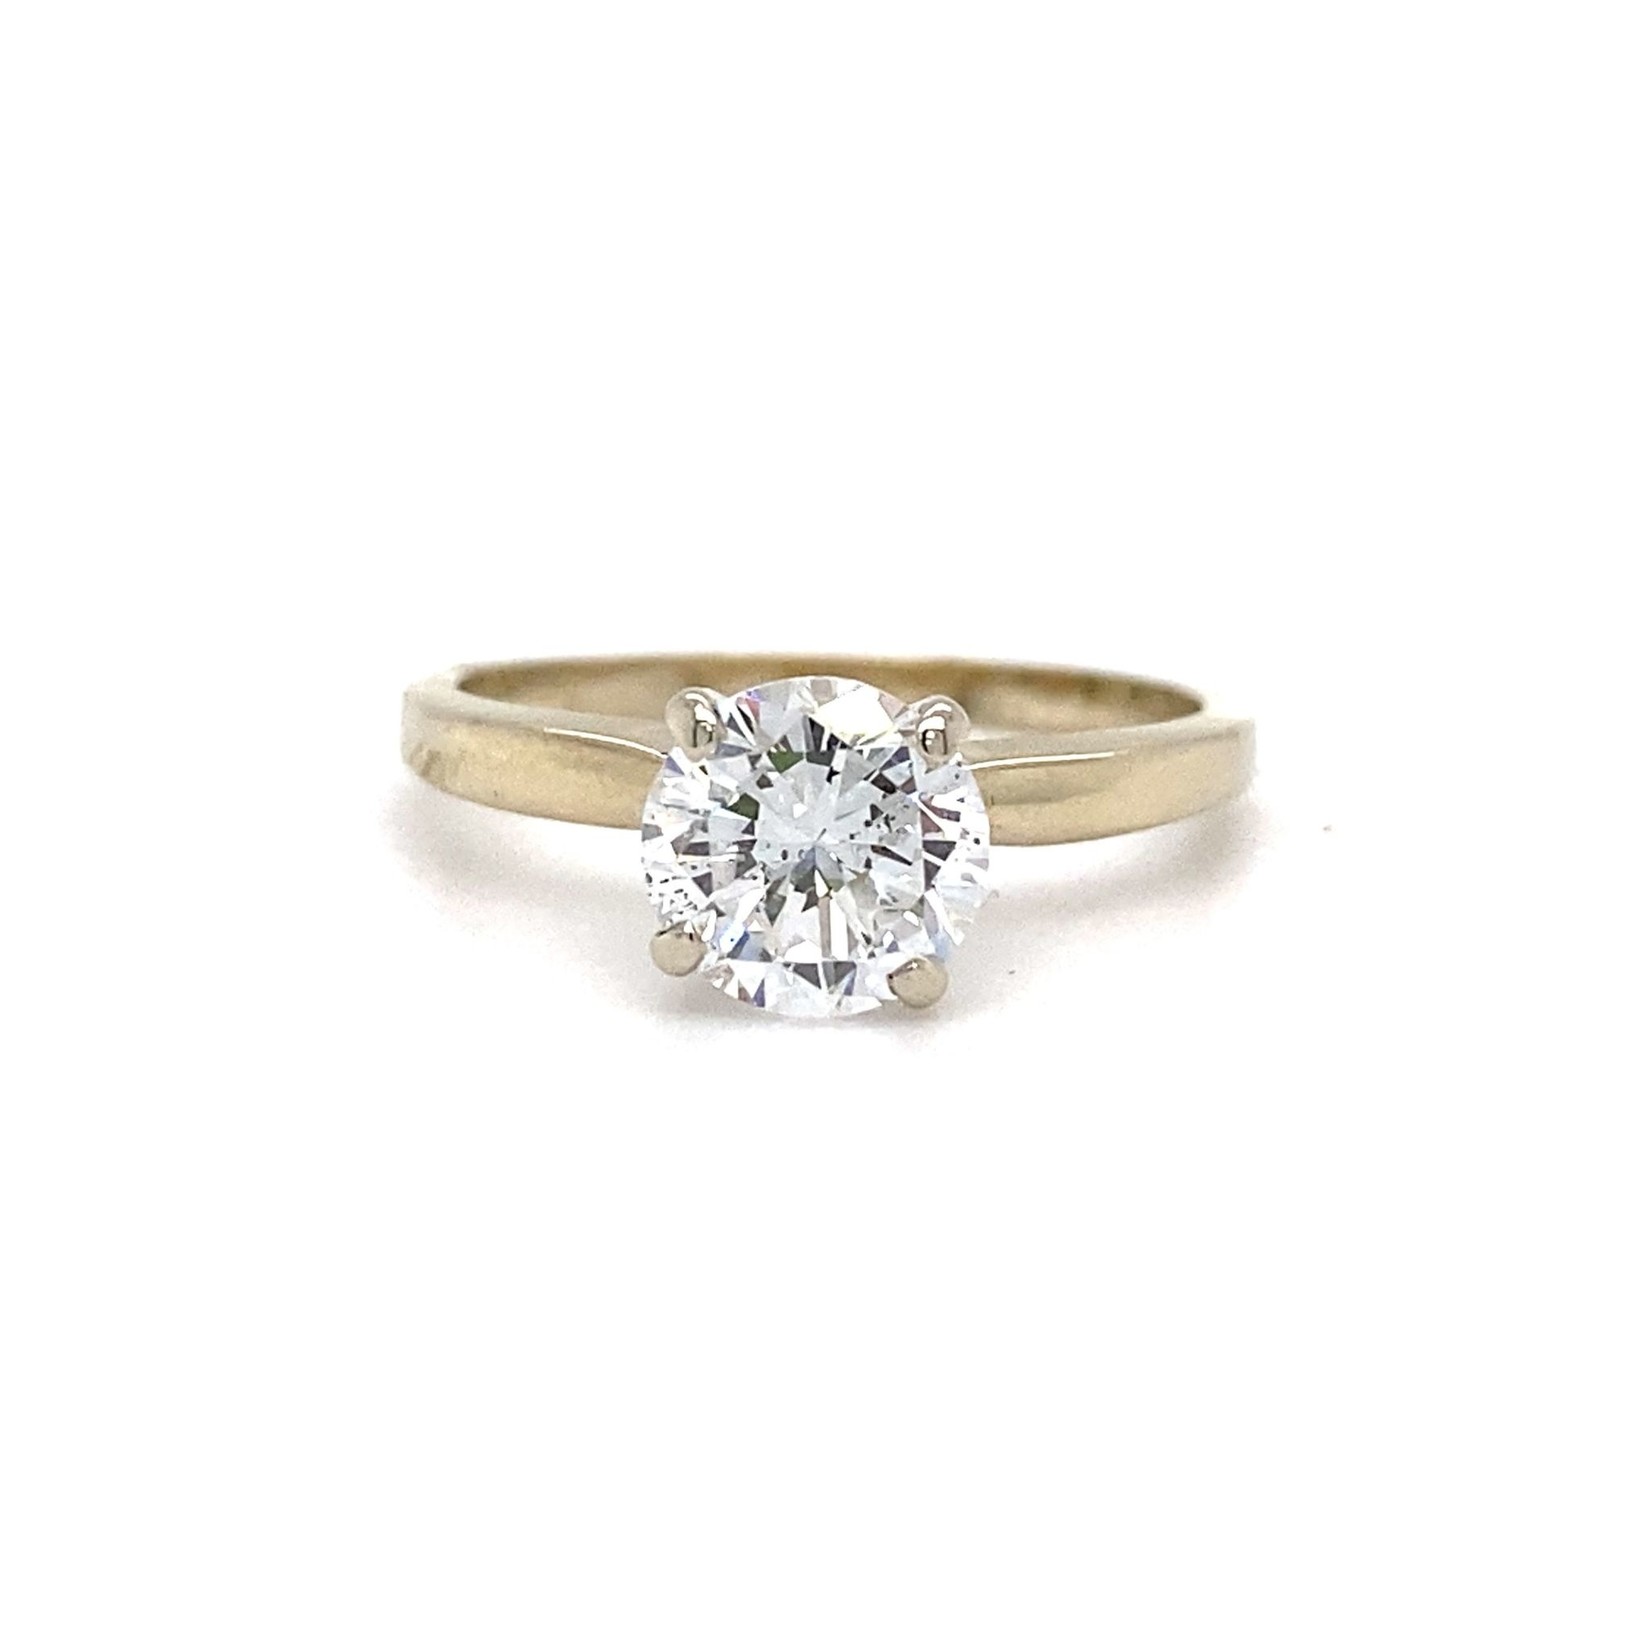 18K White Gold Diamond Solitaire Ring size 5.5